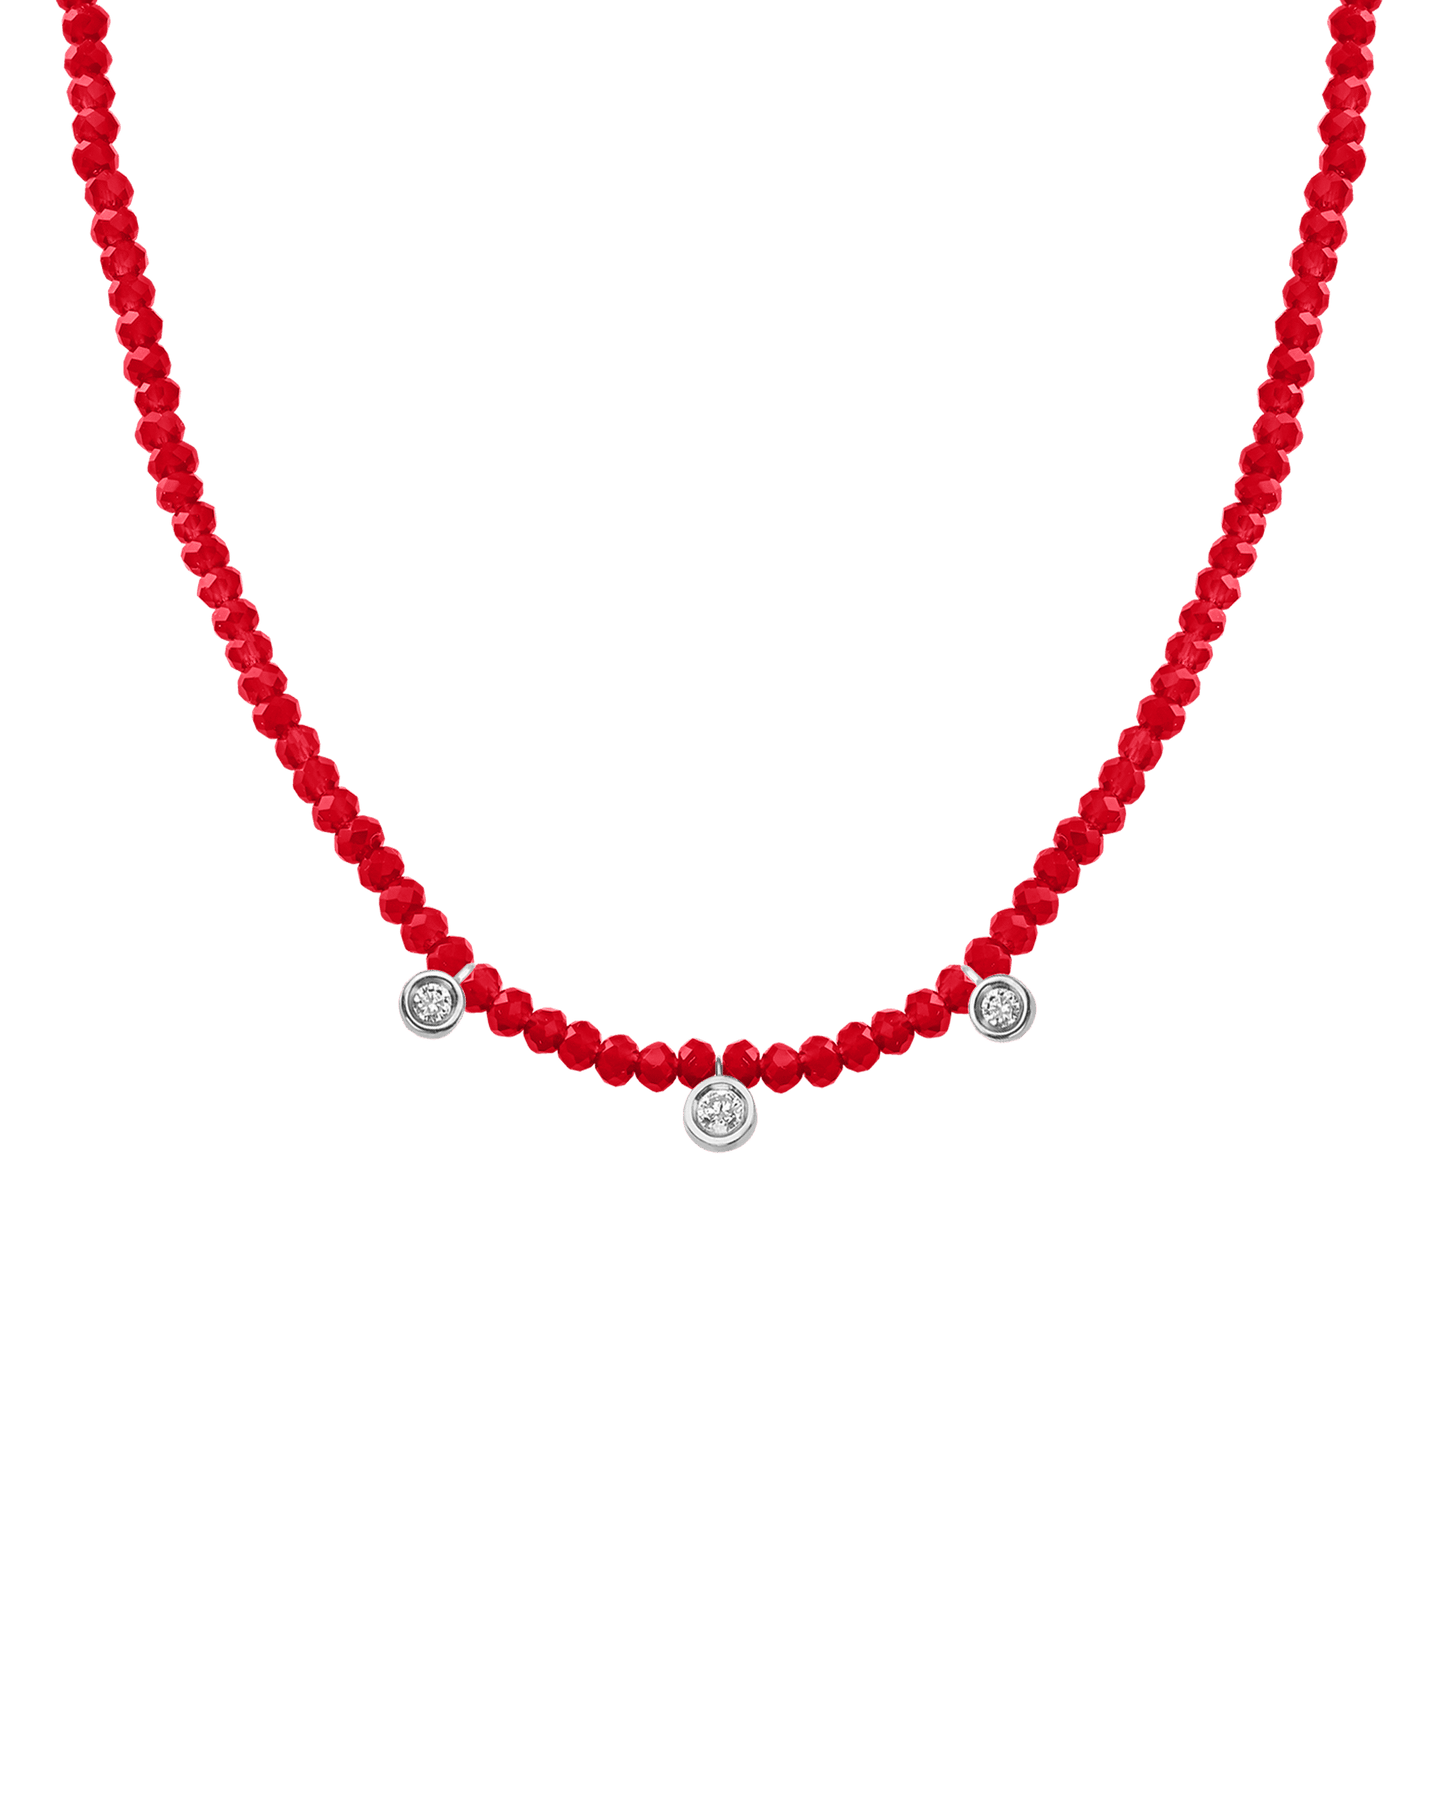 Purple Amethyst Gemstone & Three diamonds Necklace - 14K White Gold Necklaces magal-dev Natural Red Jade 14" - Collar 